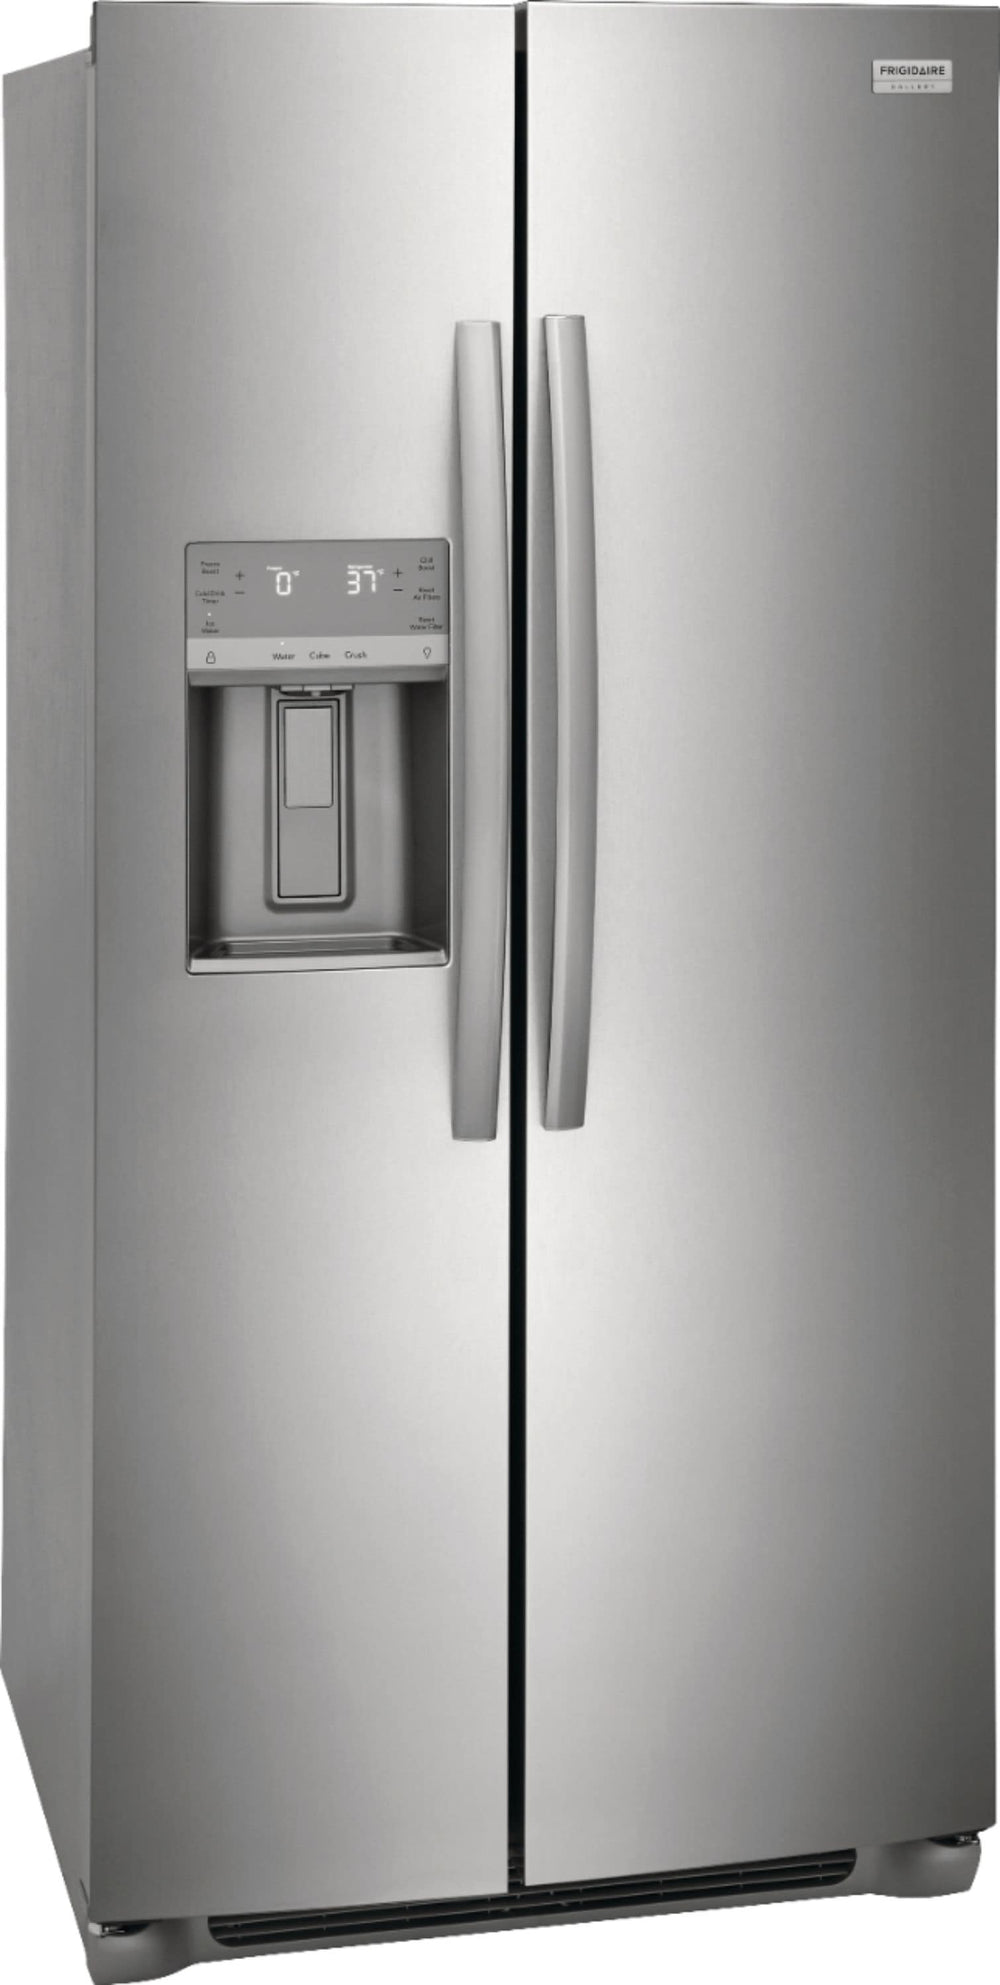 Frigidaire - Gallery 22.3 Cu. Ft. Side-by-Side Counter-Depth Refrigerator - Stainless steel_1